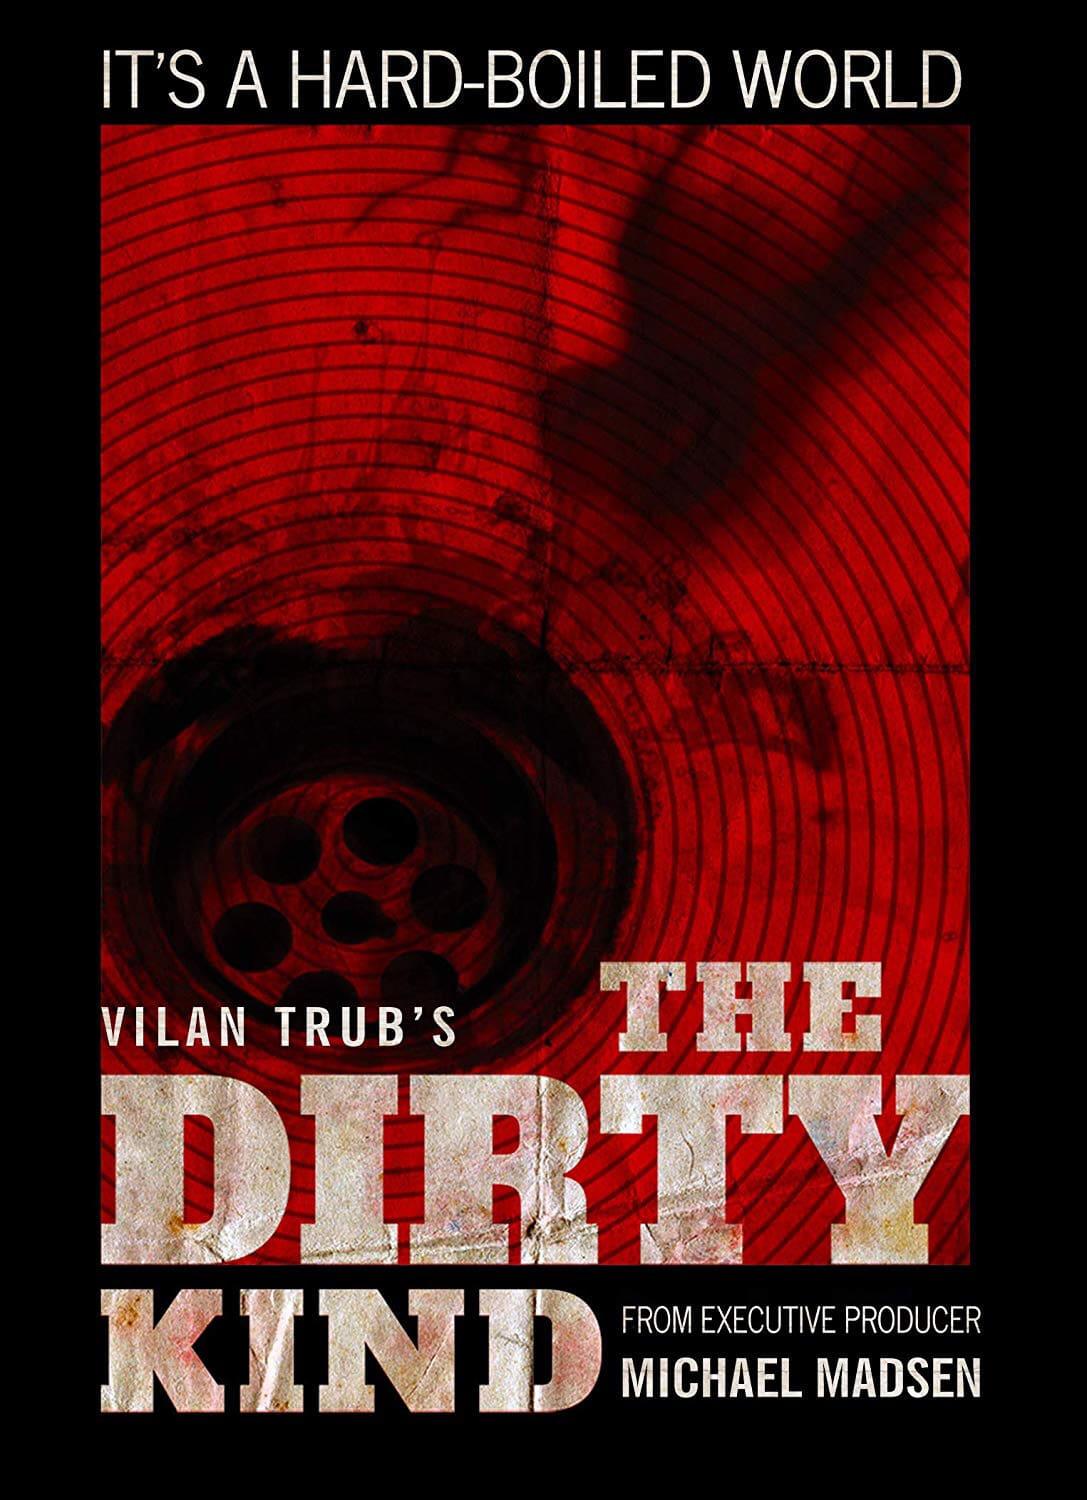 The Dirty Kind poster